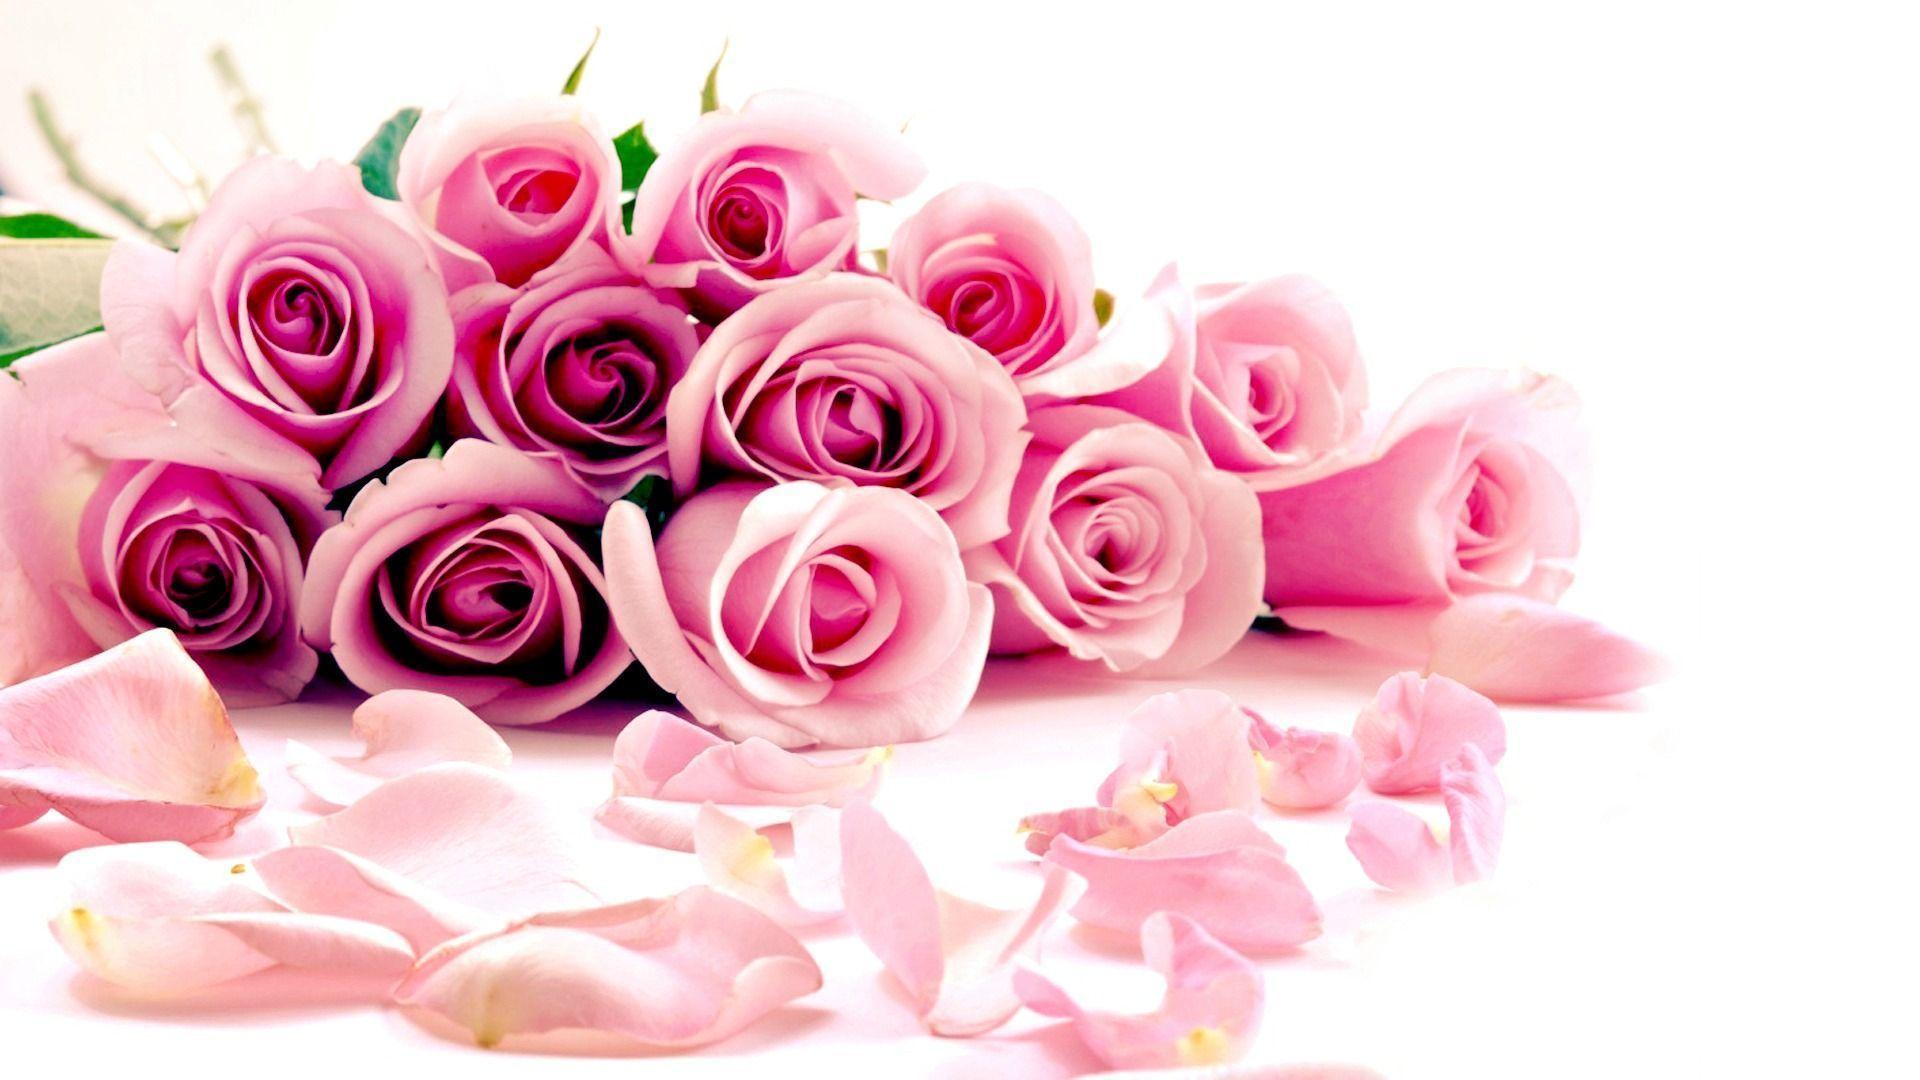 amazing pink flowers wallpaper Search Engine